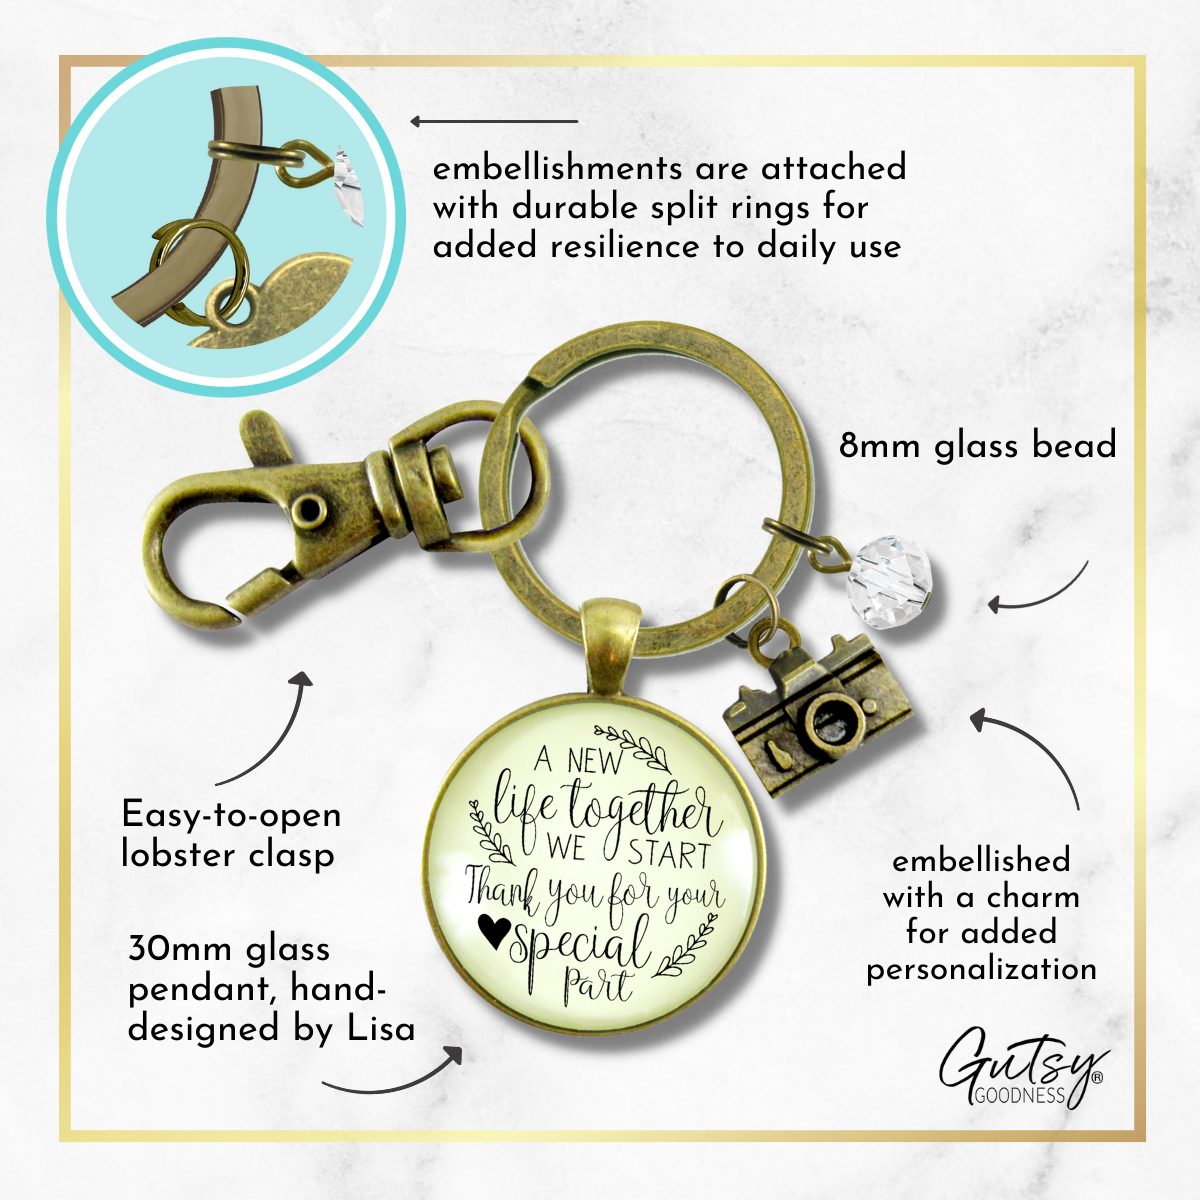 Wedding Photographer Gift Keychain A New Life We Start Rustic Camera Thank You Card - Gutsy Goodness;Wedding Photographer Gift Keychain A New Life We Start Rustic Camera Thank You Card - Gutsy Goodness Handmade Jewelry Gifts